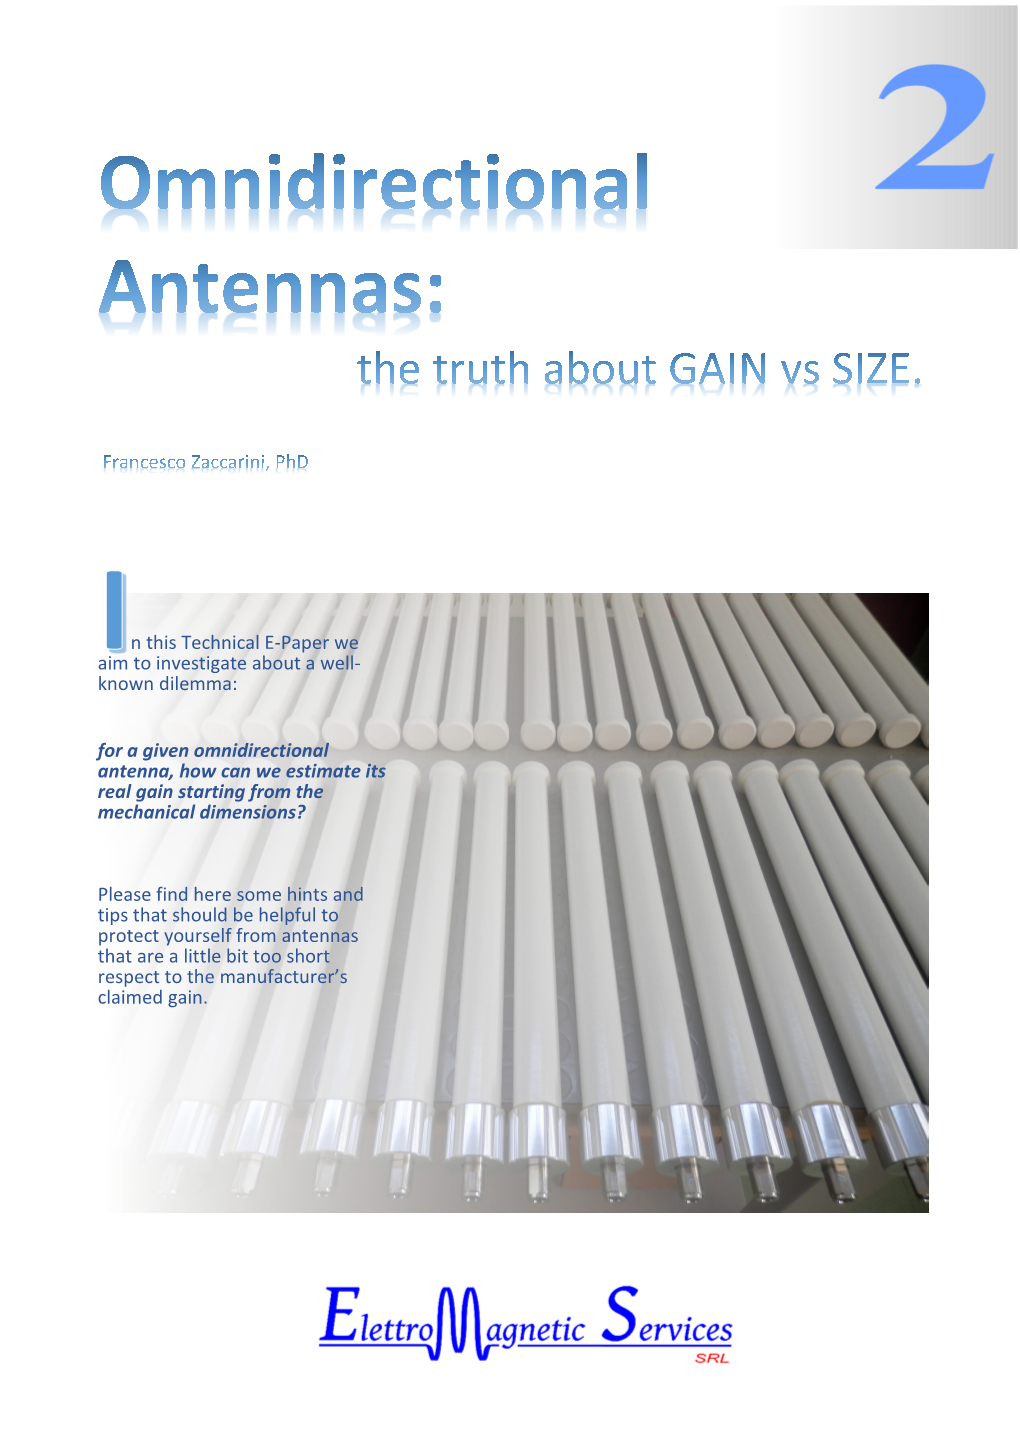 For a Given Omnidirectional Antenna, How Can We Estimate Its Real Gain Starting from the Mechanical Dimensions?